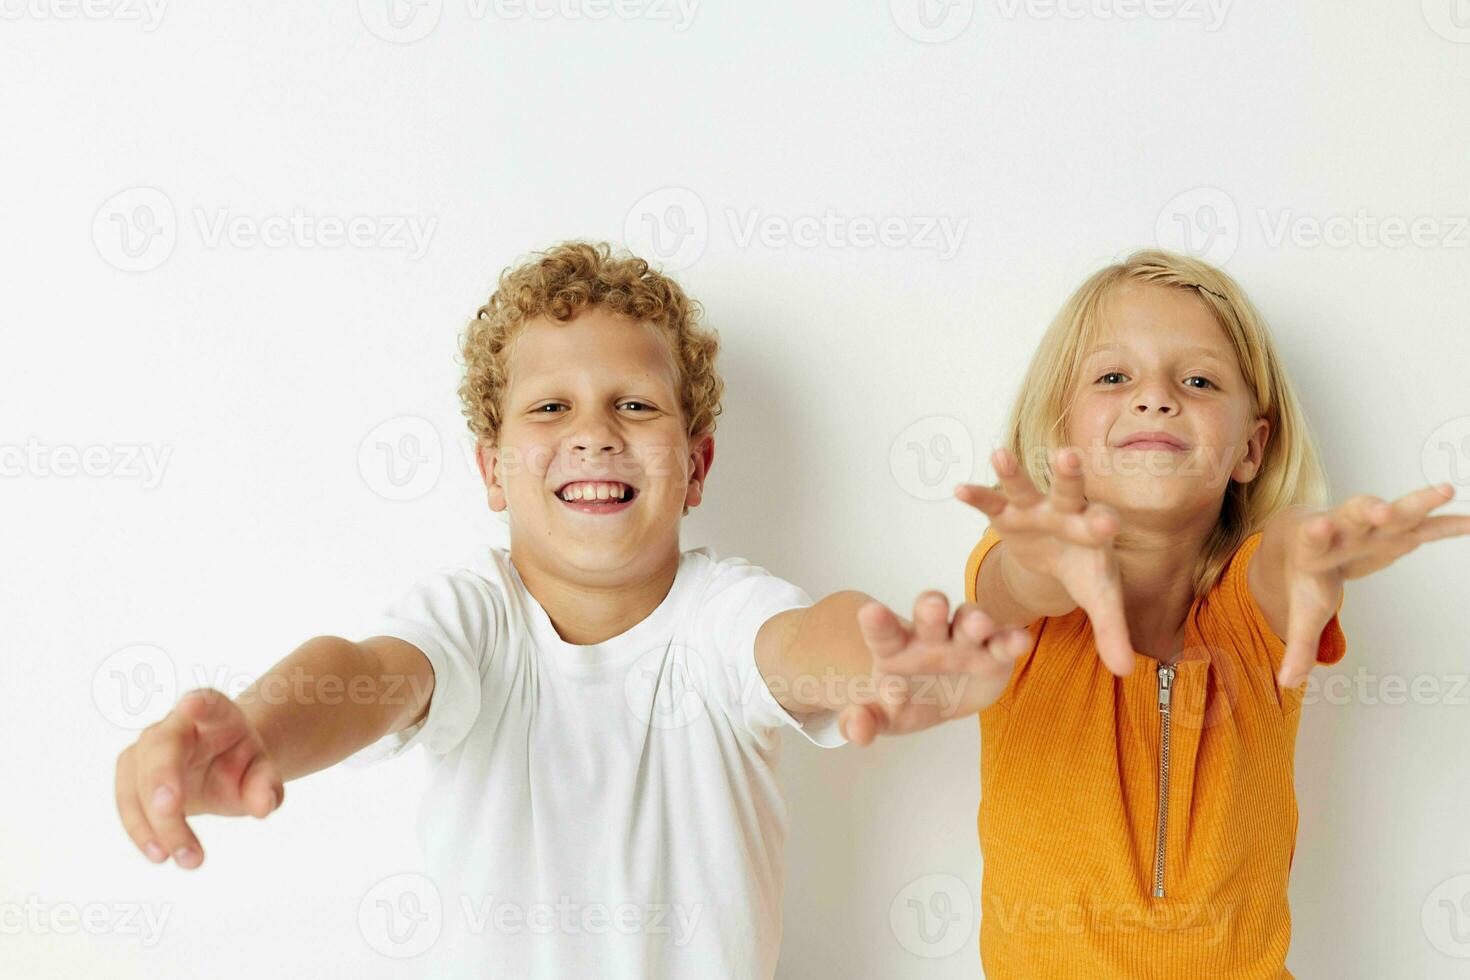 Cute preschool kids posing hand gesture smile casual wear isolated background unaltered photo